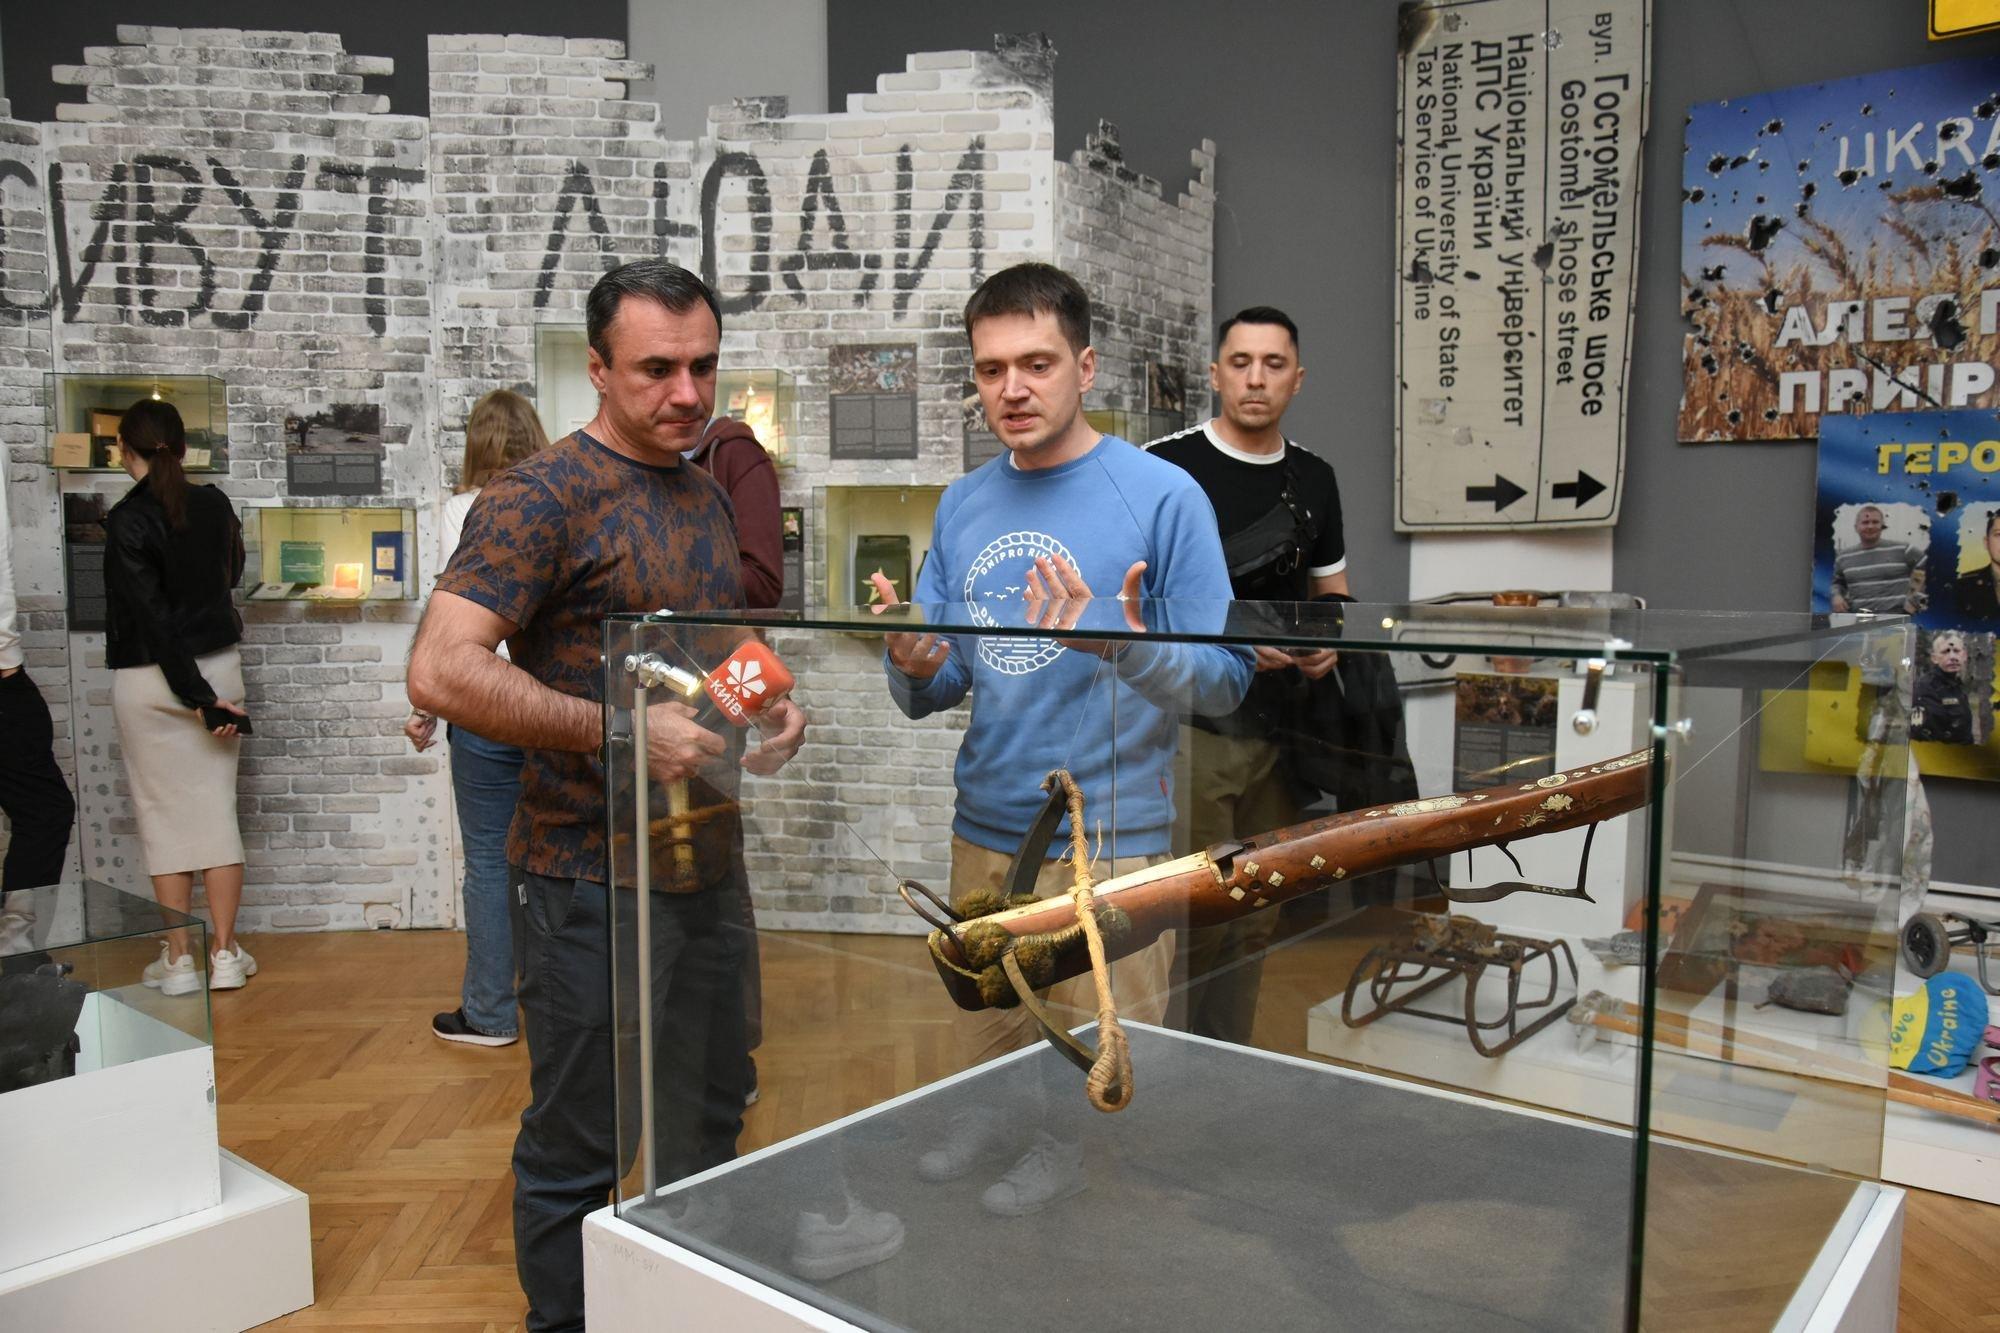 An exhibition about the heroic defense of the capital has opened at the National Museum of History of Ukraine